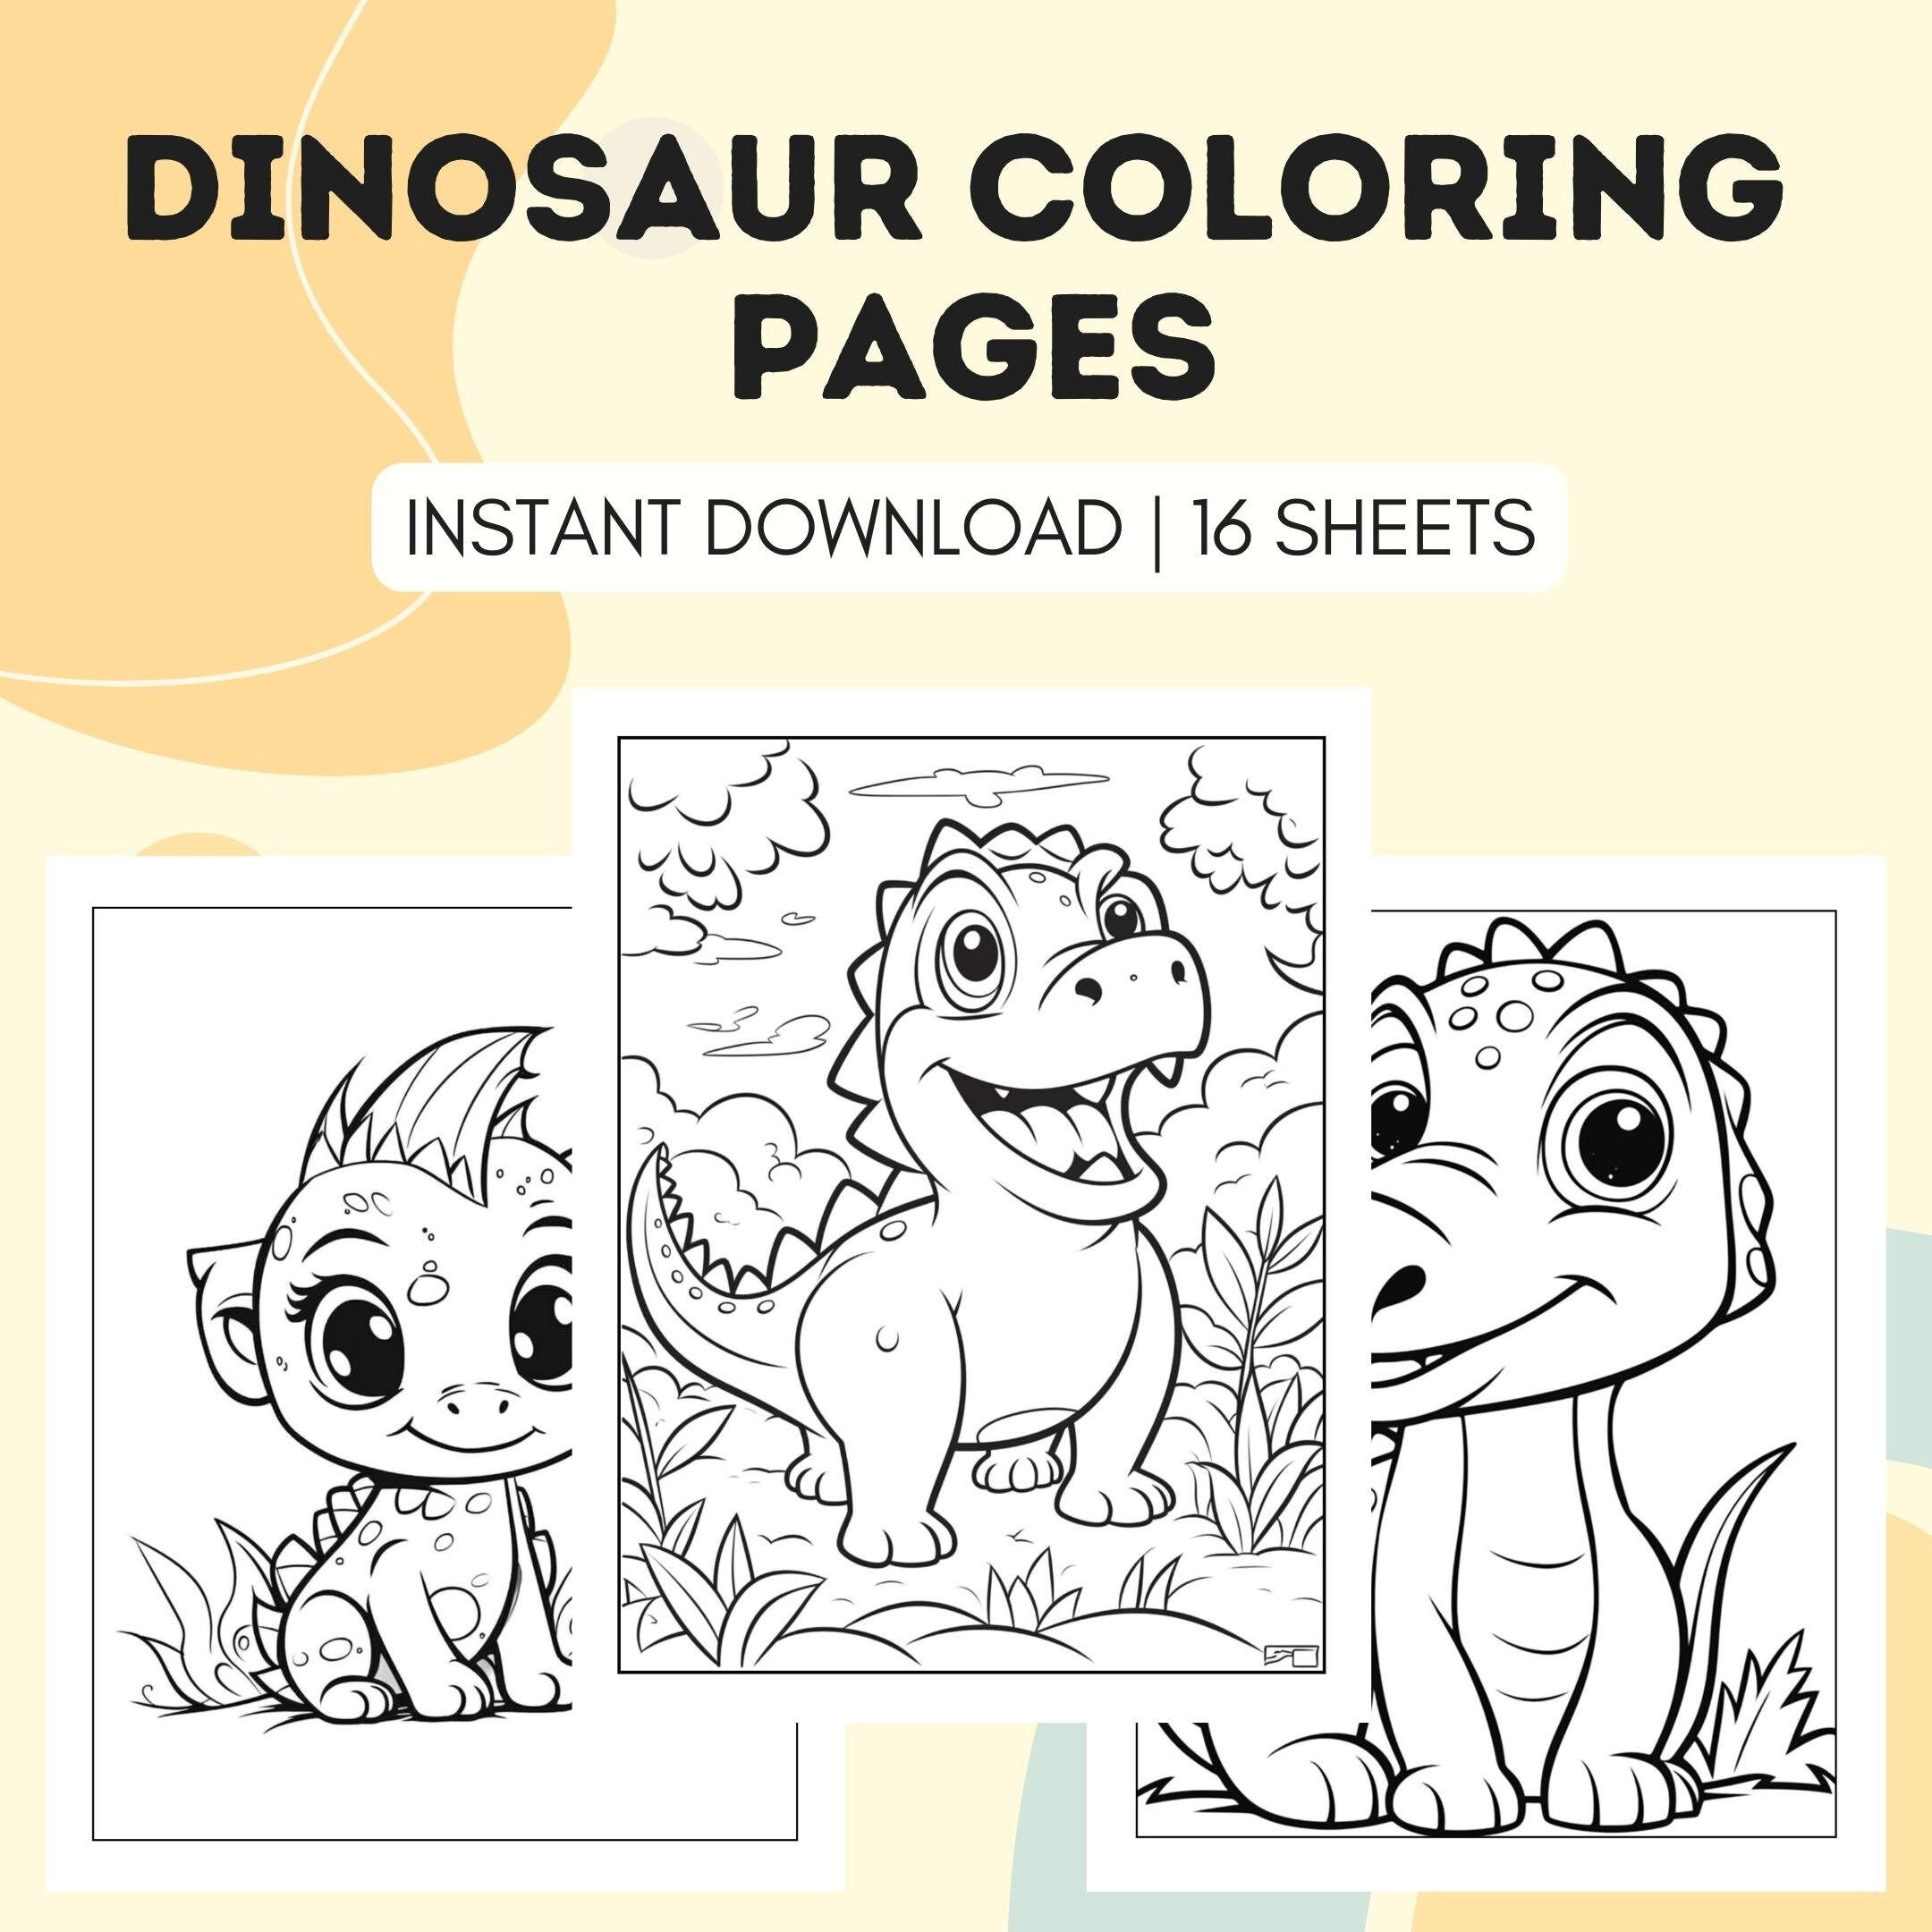 Dinosaur Coloring Pages | 16 Cute Dinos Pictures | Instant Download | Printable Coloring Templates for Kids | Letter & A4 | Adorable Images